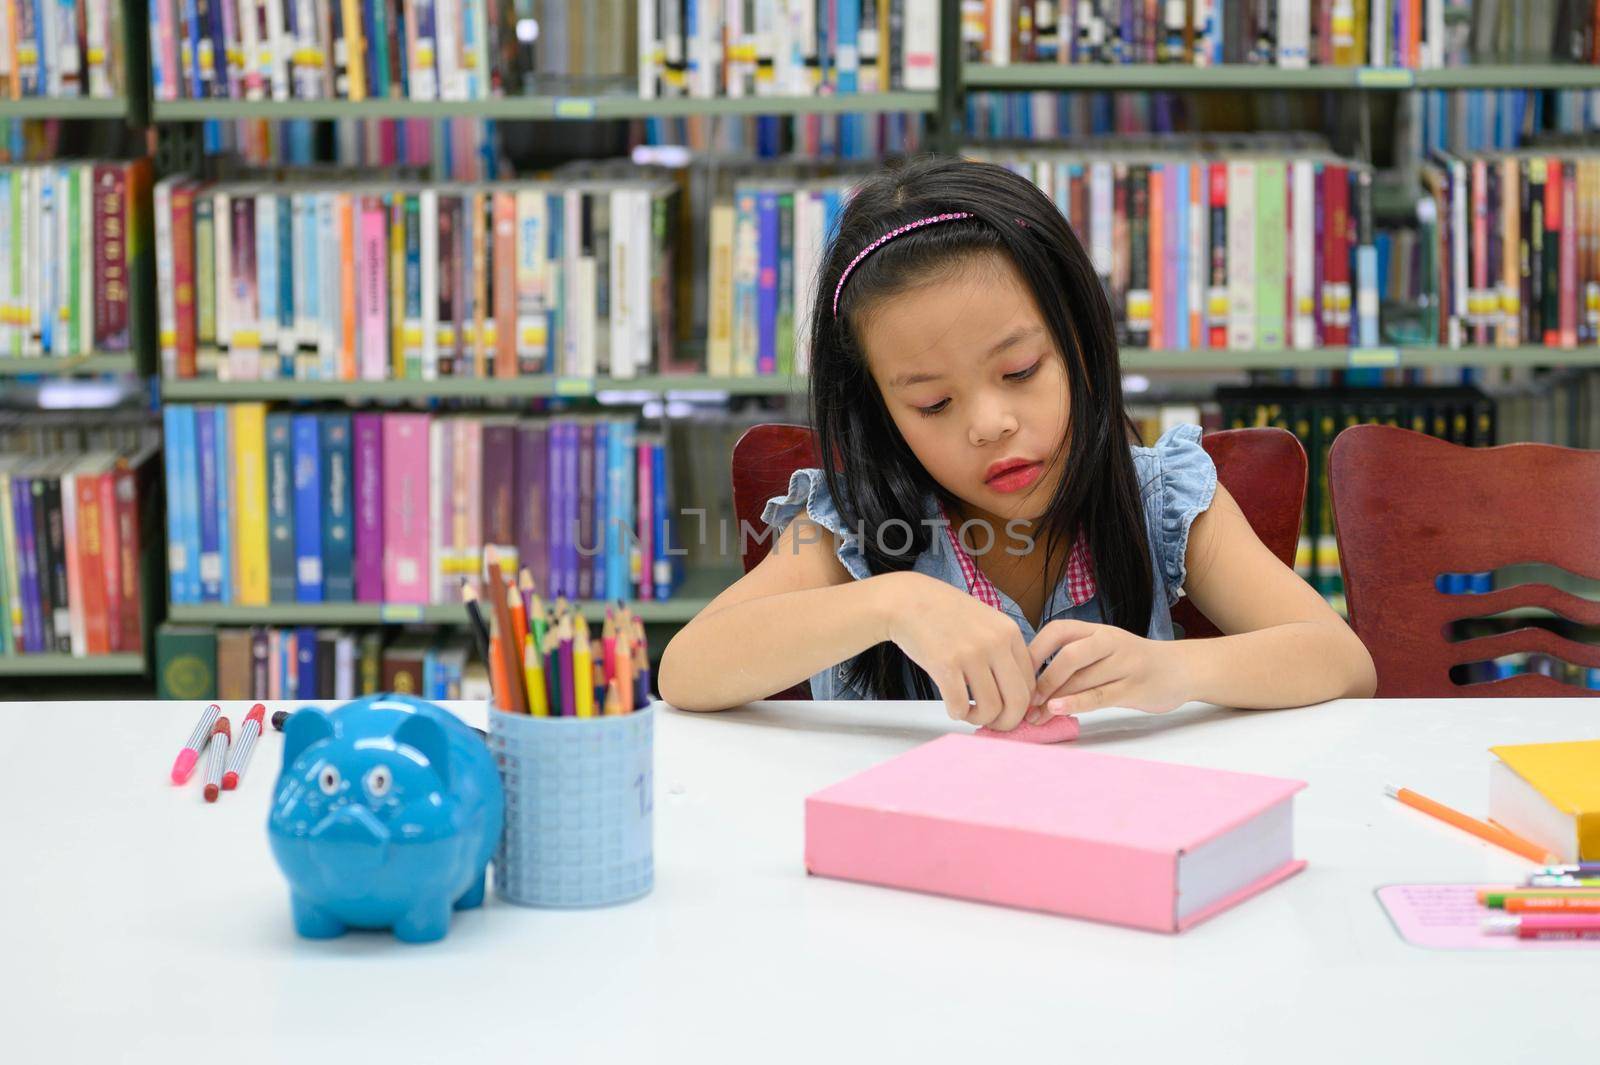 Asian girl folding and crafting paper in library during art class. Education and activity concept